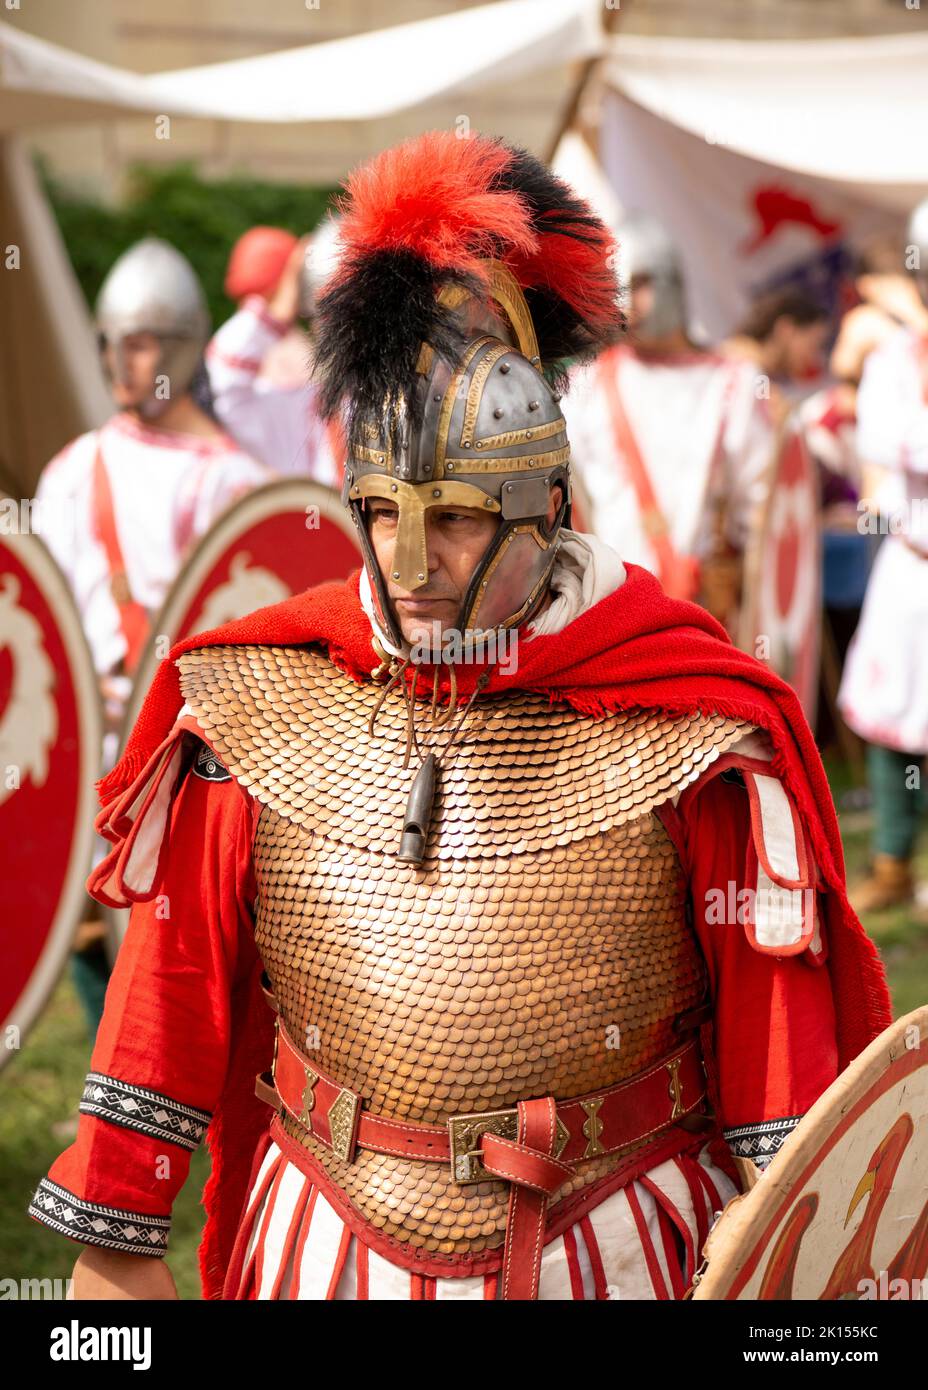 Roman warrior dressed in red and white at a reenactment of 4th Century Roman life during the 'Serdica is my Rome' heritage festival at the archaeologi Stock Photo